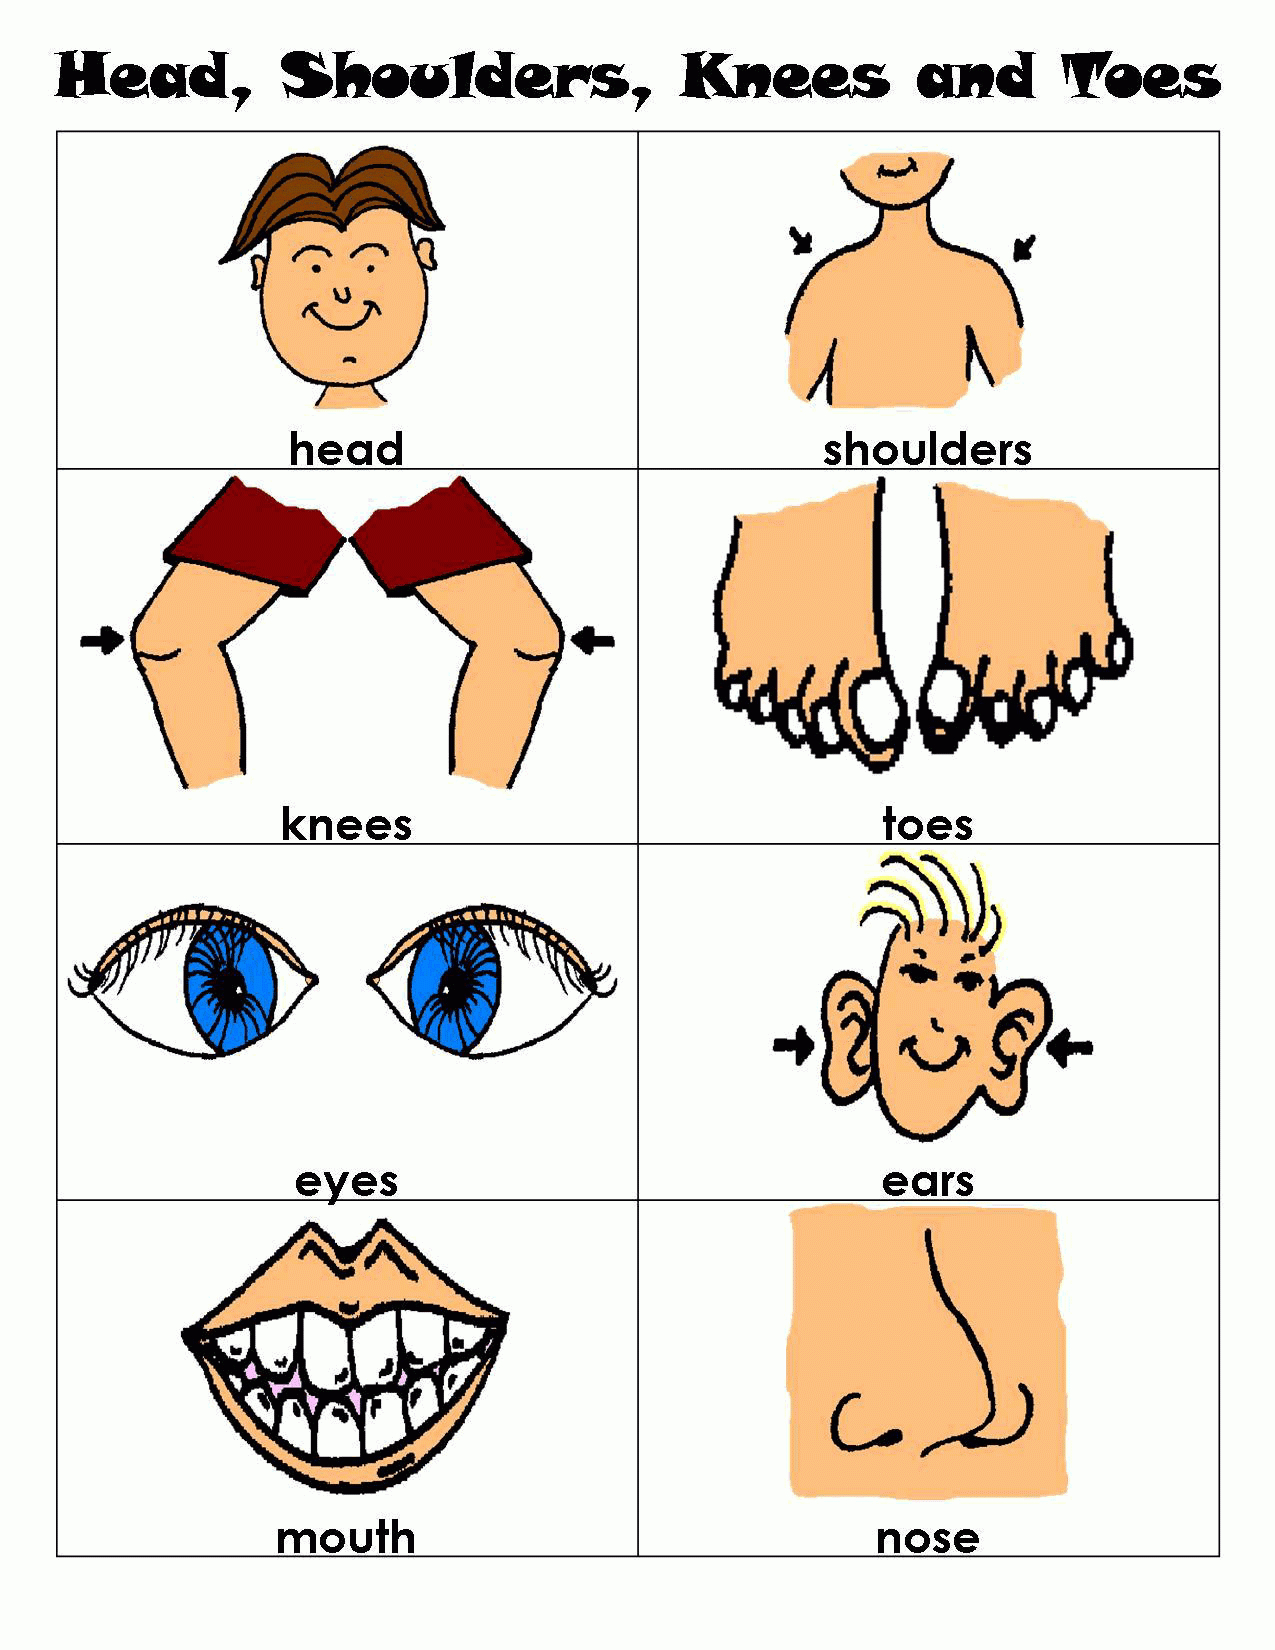 Head Shoulders Knees And Toes Flashcards | Head